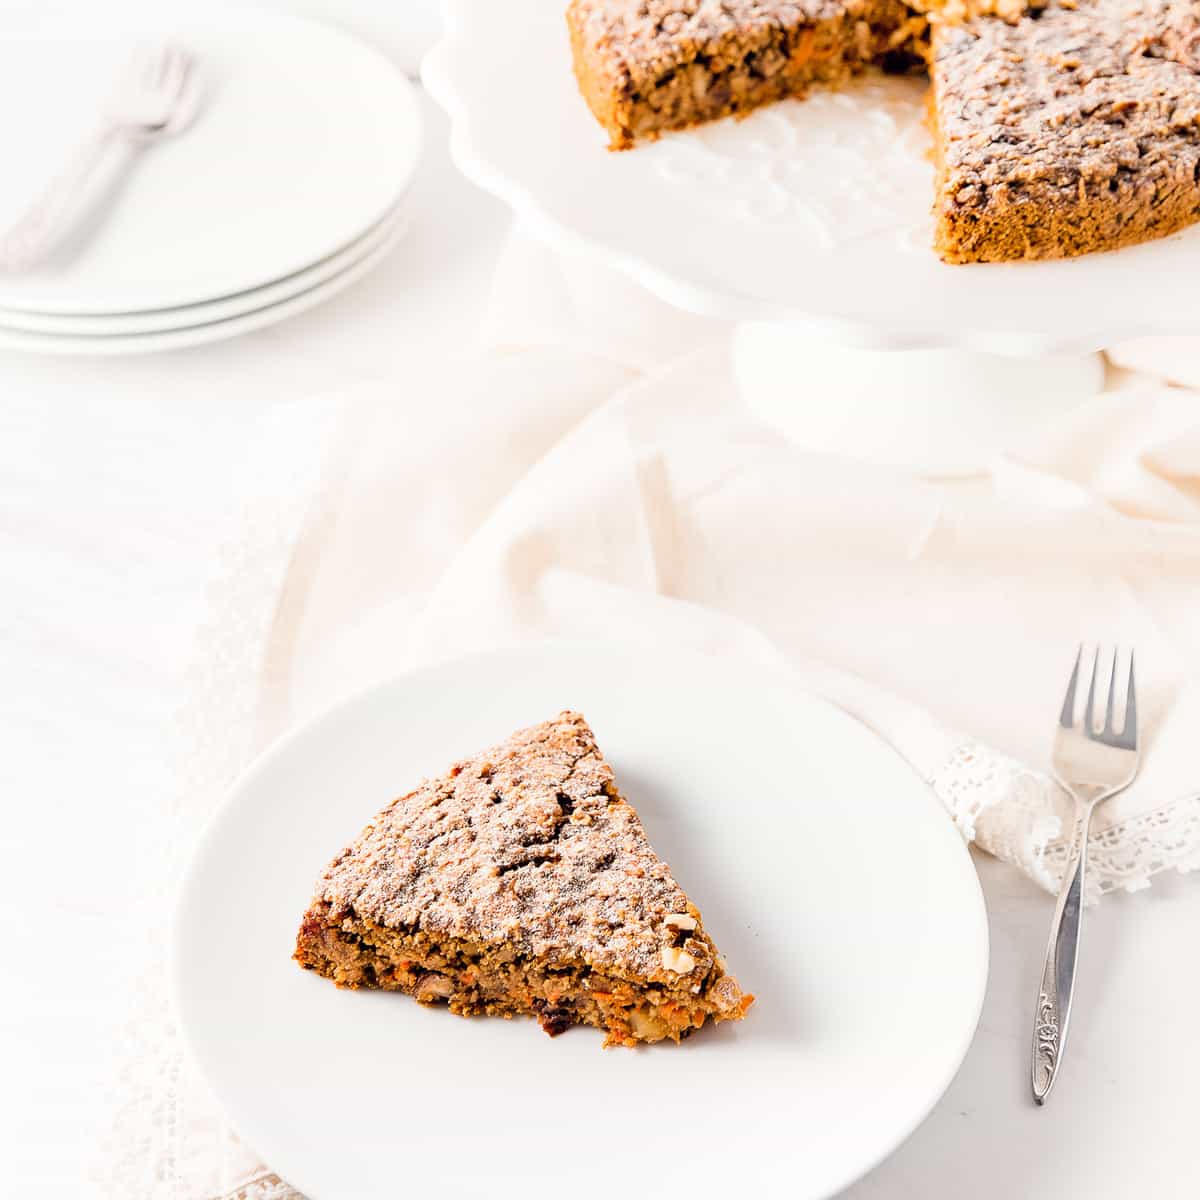 rustic carrot cake, cake, recipe, vegan, vegetarian, whole food plant based, wfpb, gluten free, oil free, refined sugar free, no oil, no dairy, dessert, sweets, dinner party, entertaining, simple, healthy